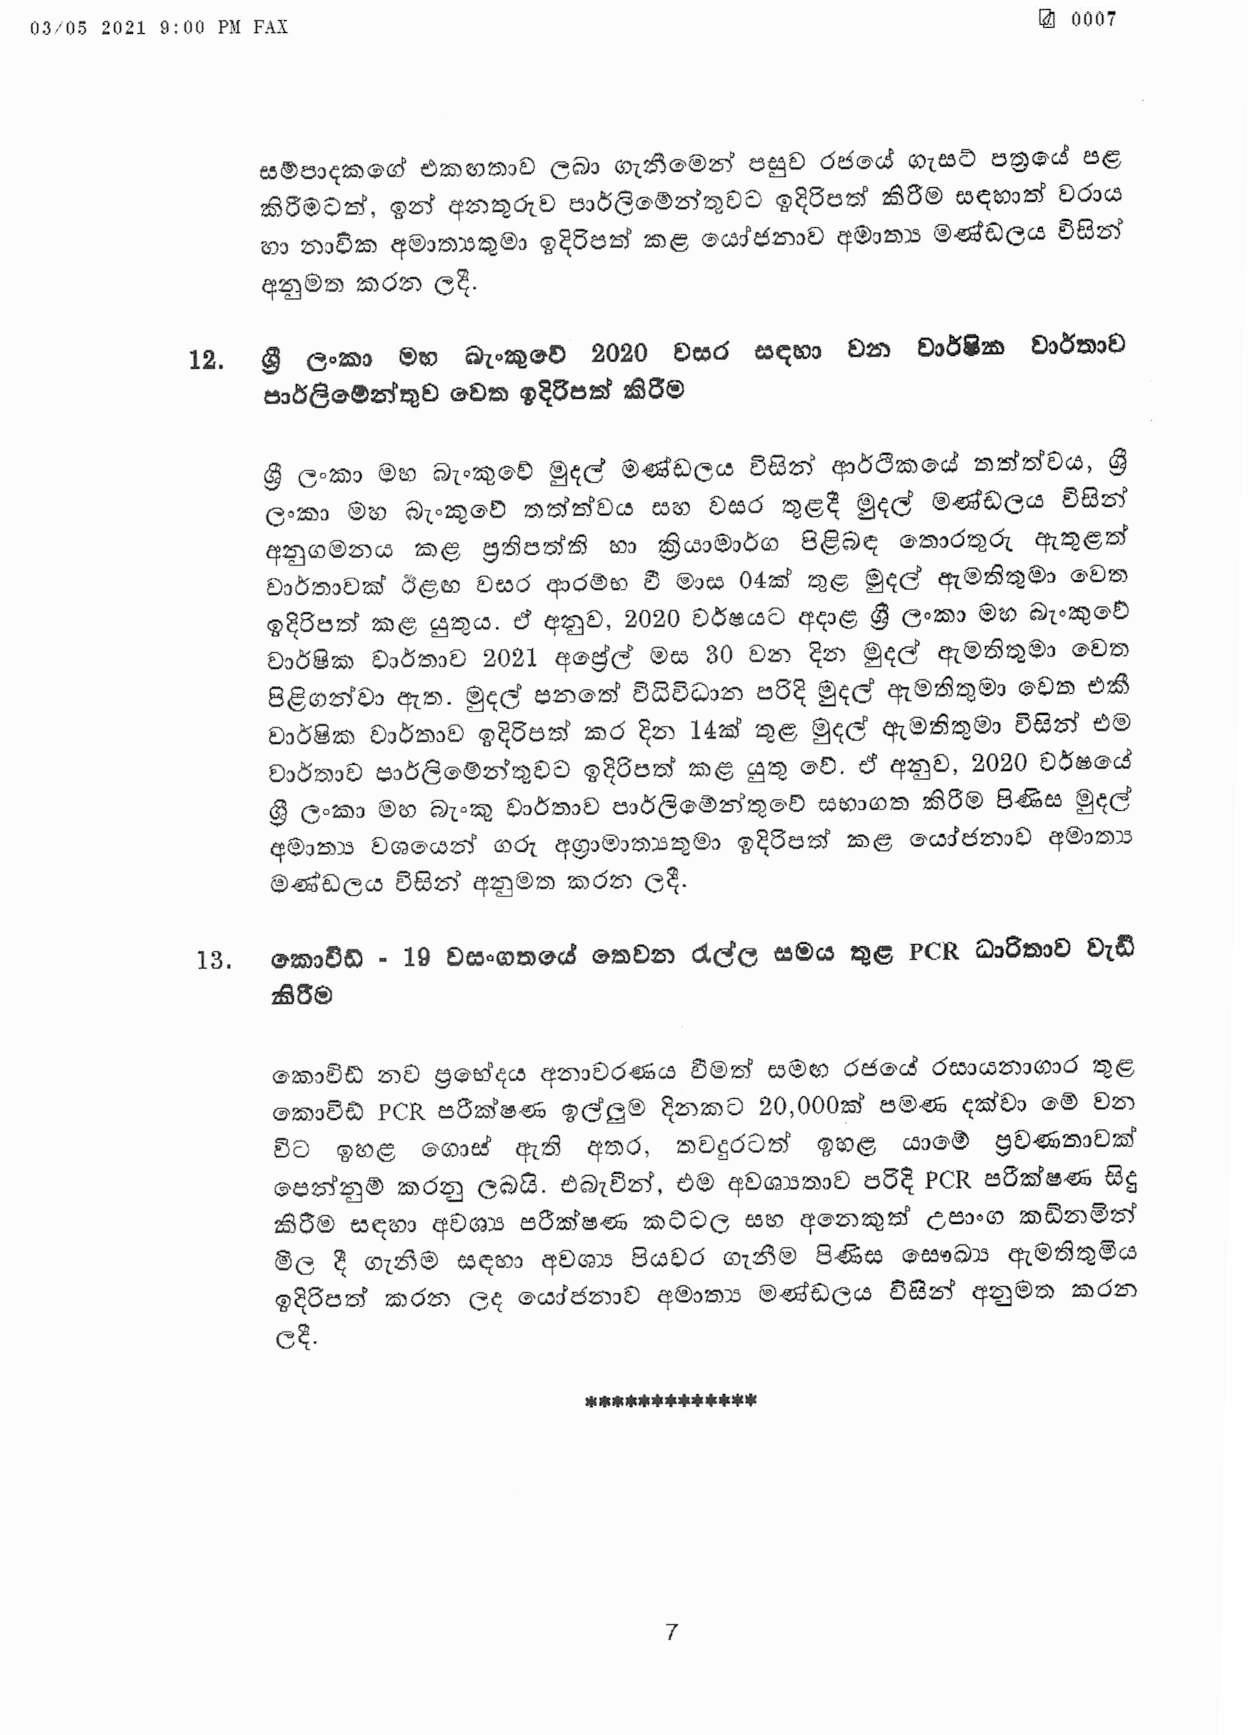 Cabinet Decision on 03.05.2021Sinhala page 007